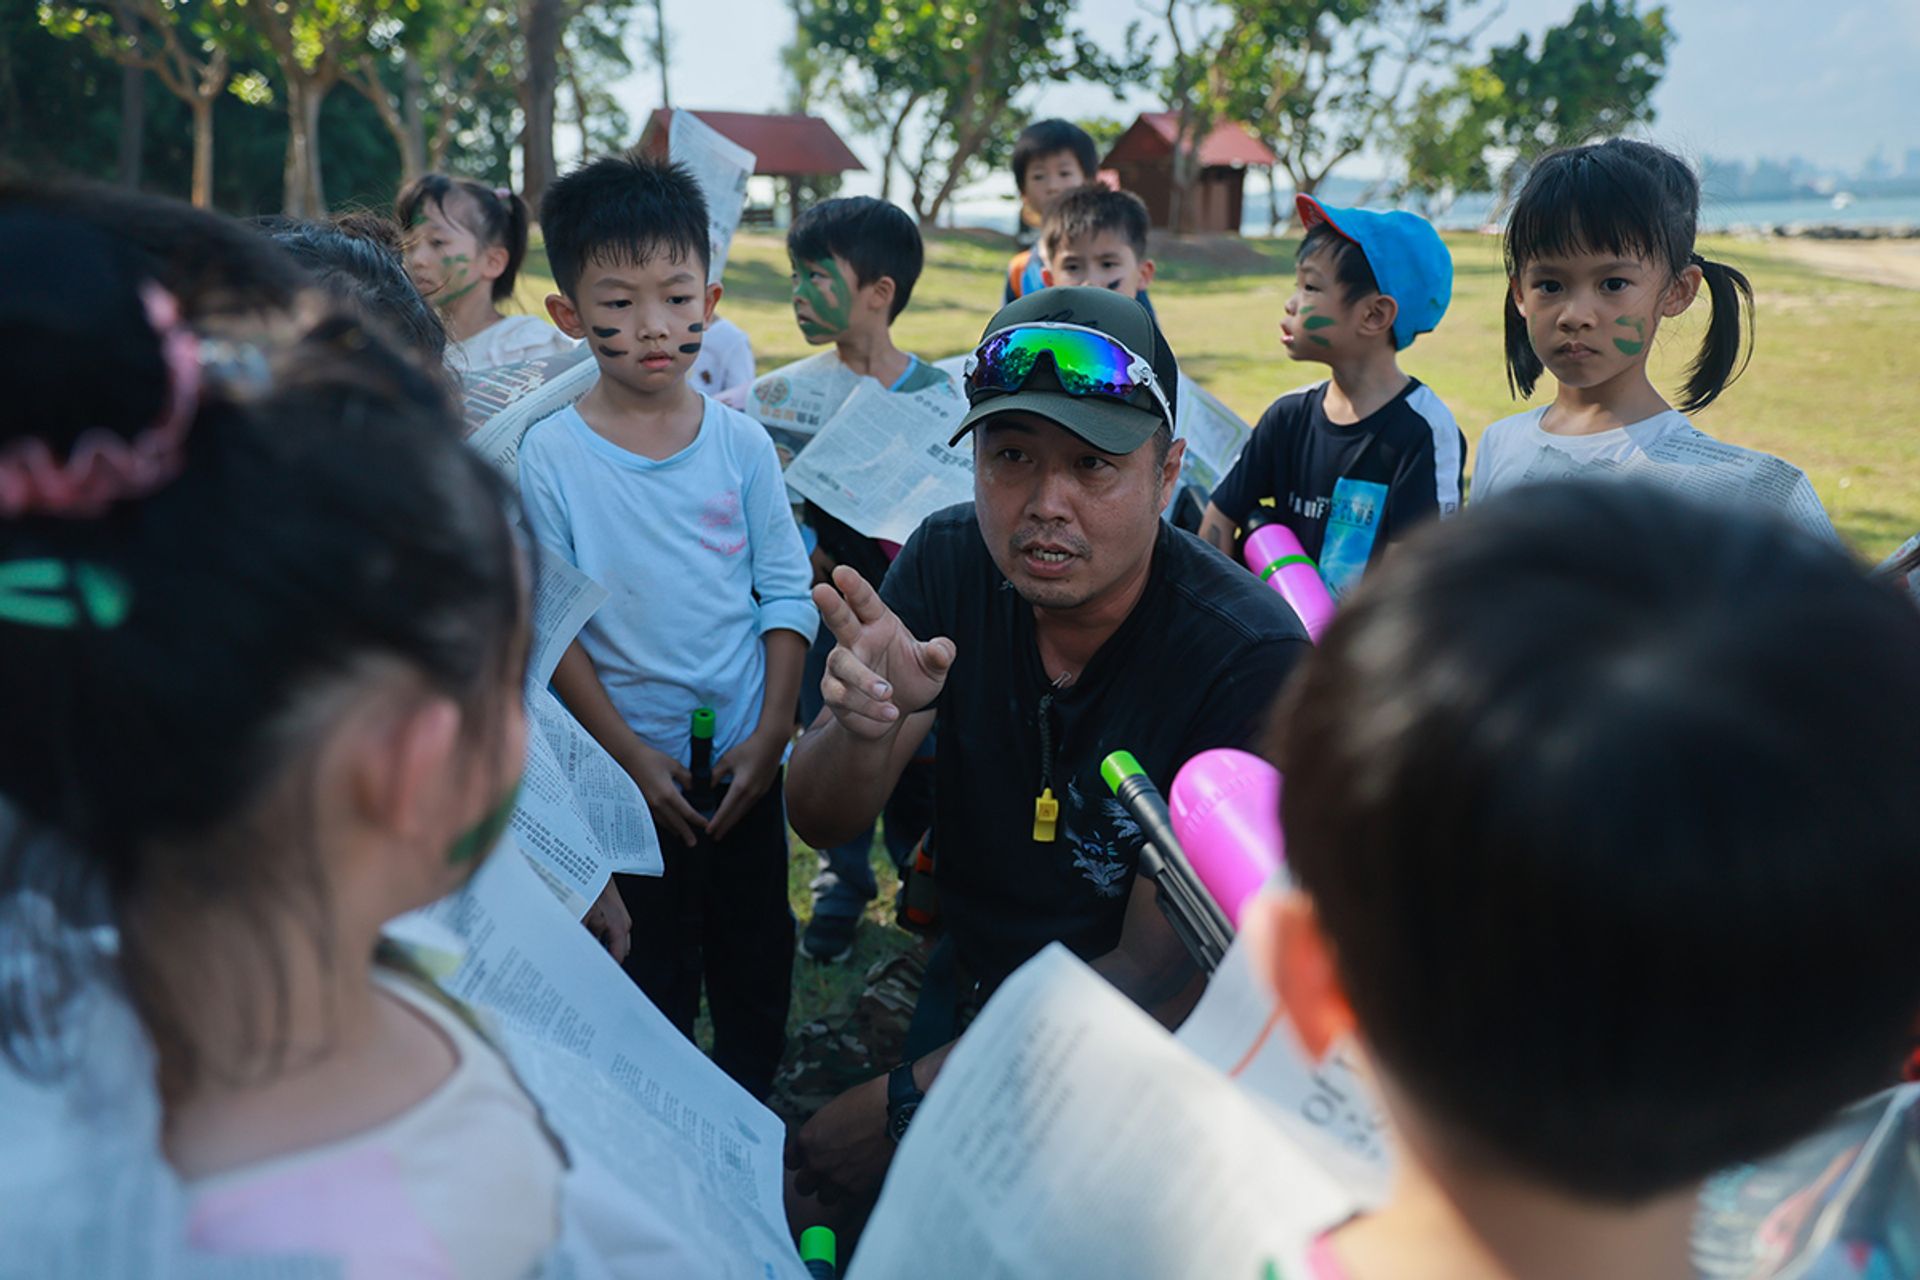 Camp instructor Foo Guo Liang, 44, helps the children to regroup and come up with a strategy to win.